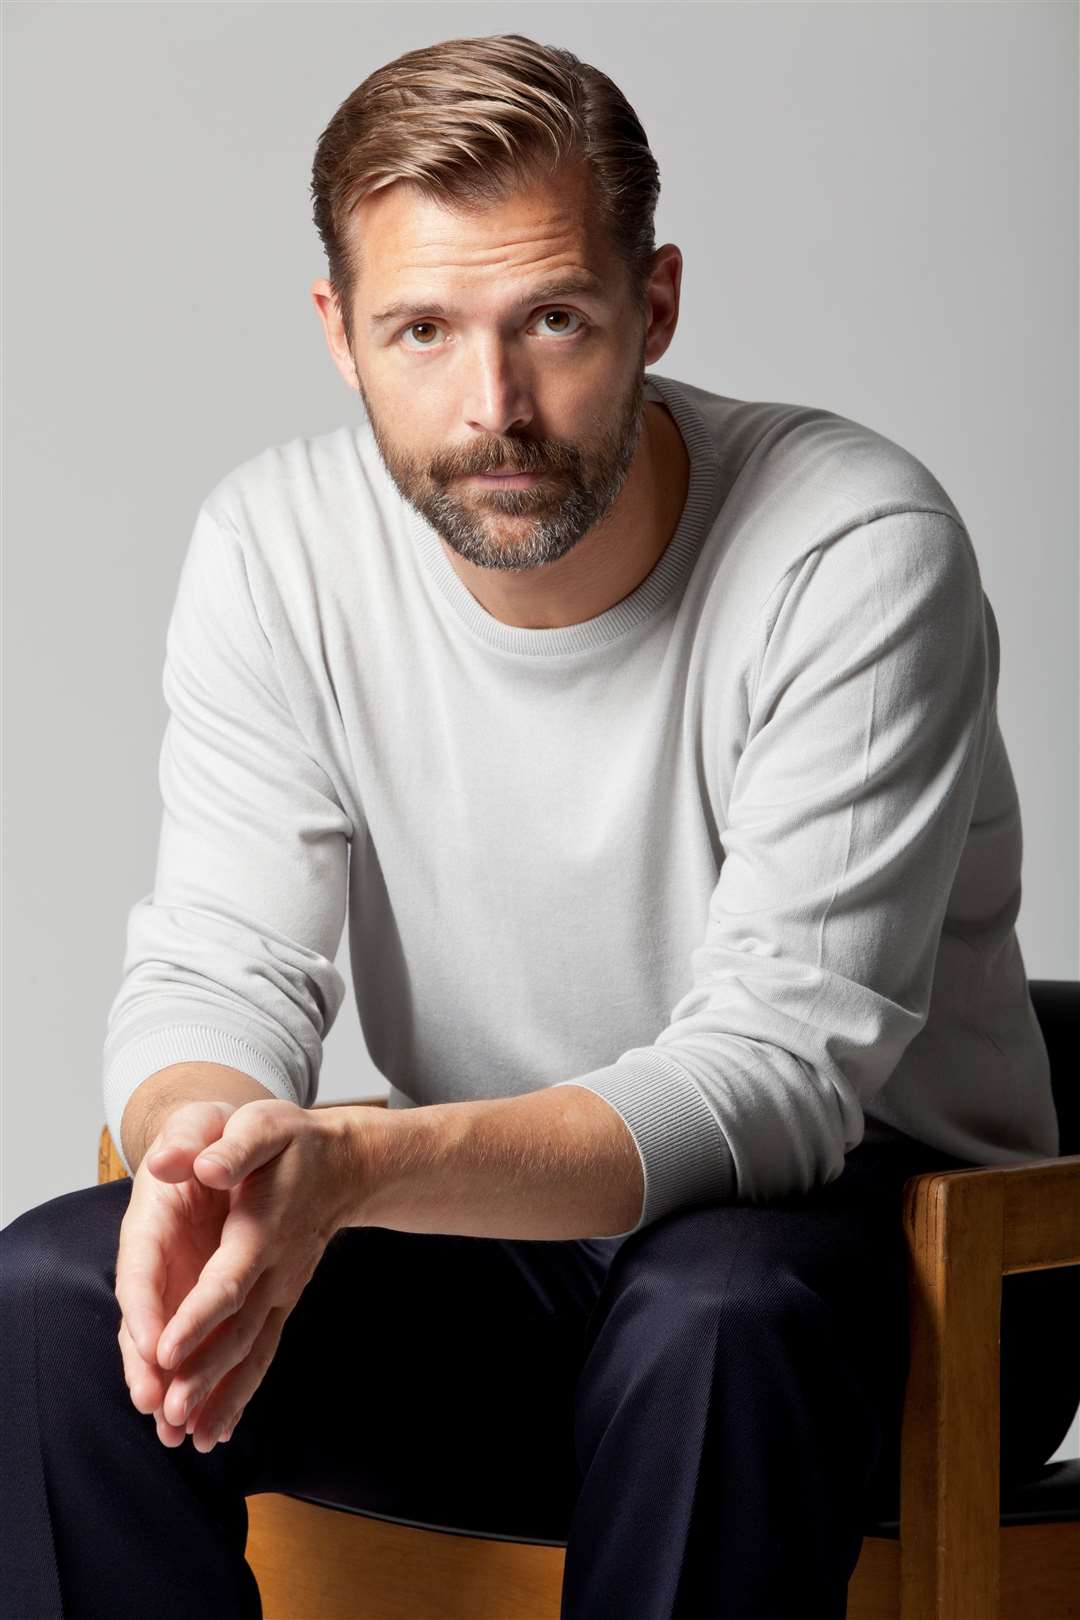 The Great British Sewing Bee's Patrick Grant is among this year's virtual guests.